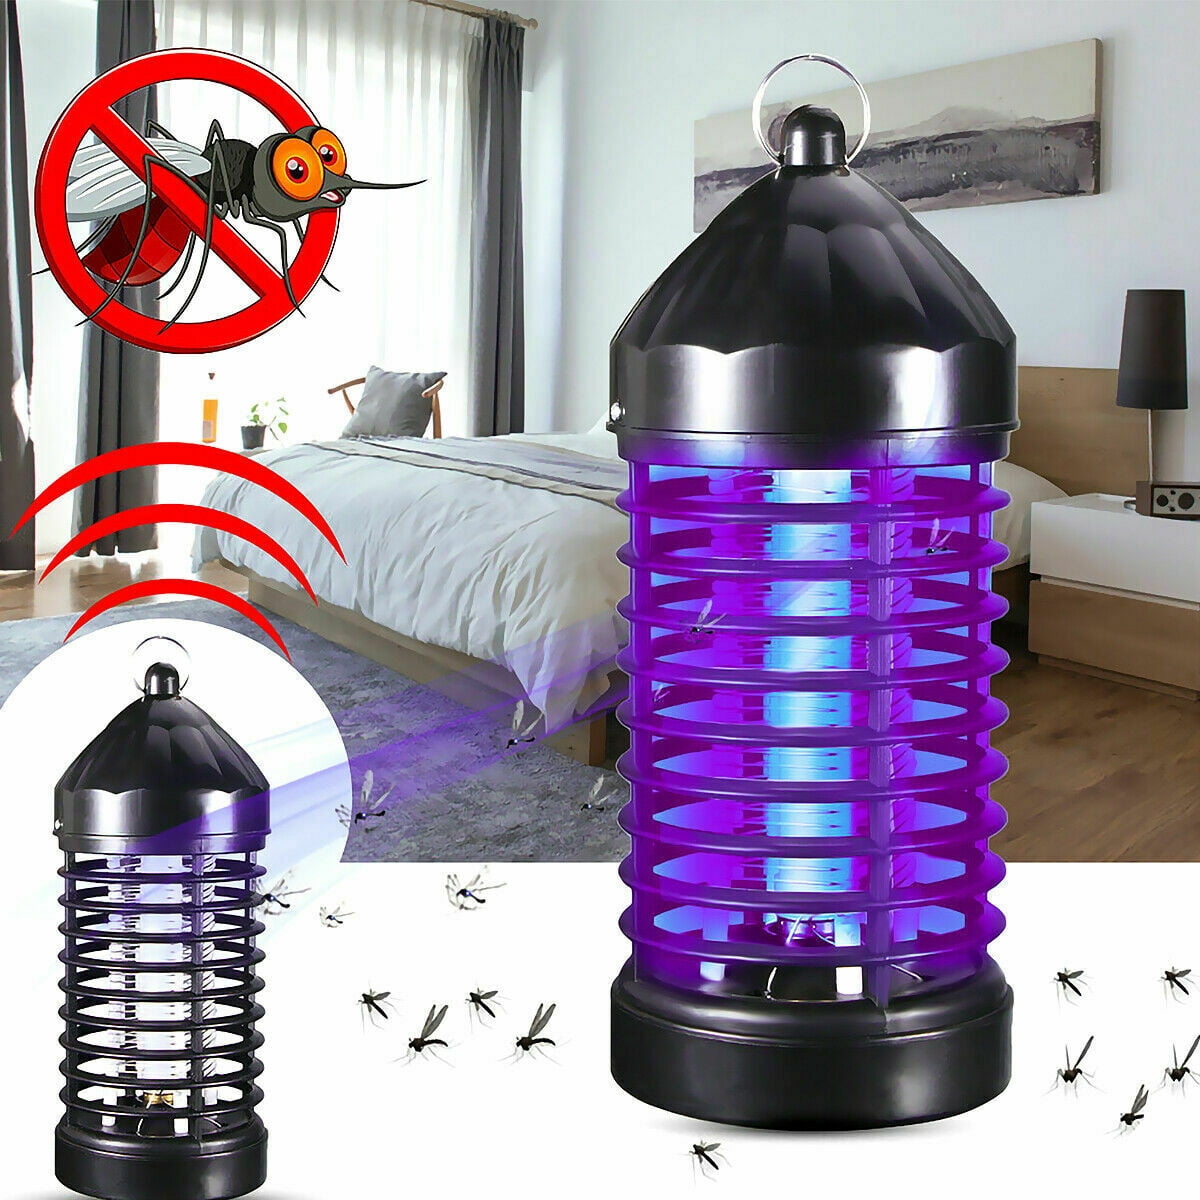 Electric-UV-Mosquito-Killer-Lamp-Fly-Bug-Indoor-Insect-Zapper-Pest-Catcher/ 